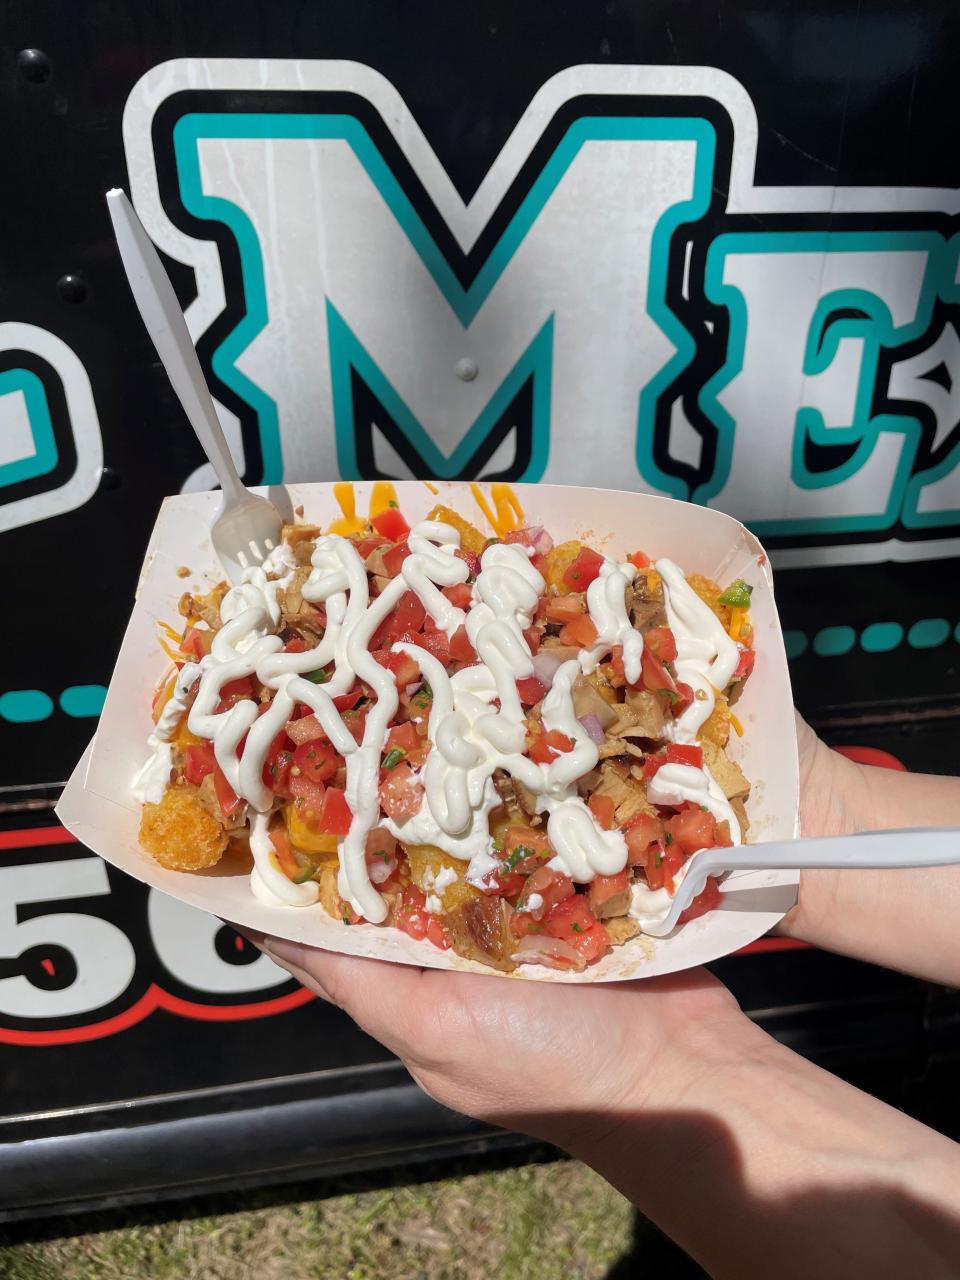 Tater tot nachos from Ma & Pa's Tex-Mex BBQ at last year's Jersey Shore Food Truck Festival at Monmouth Park Racetrack in Oceanport.